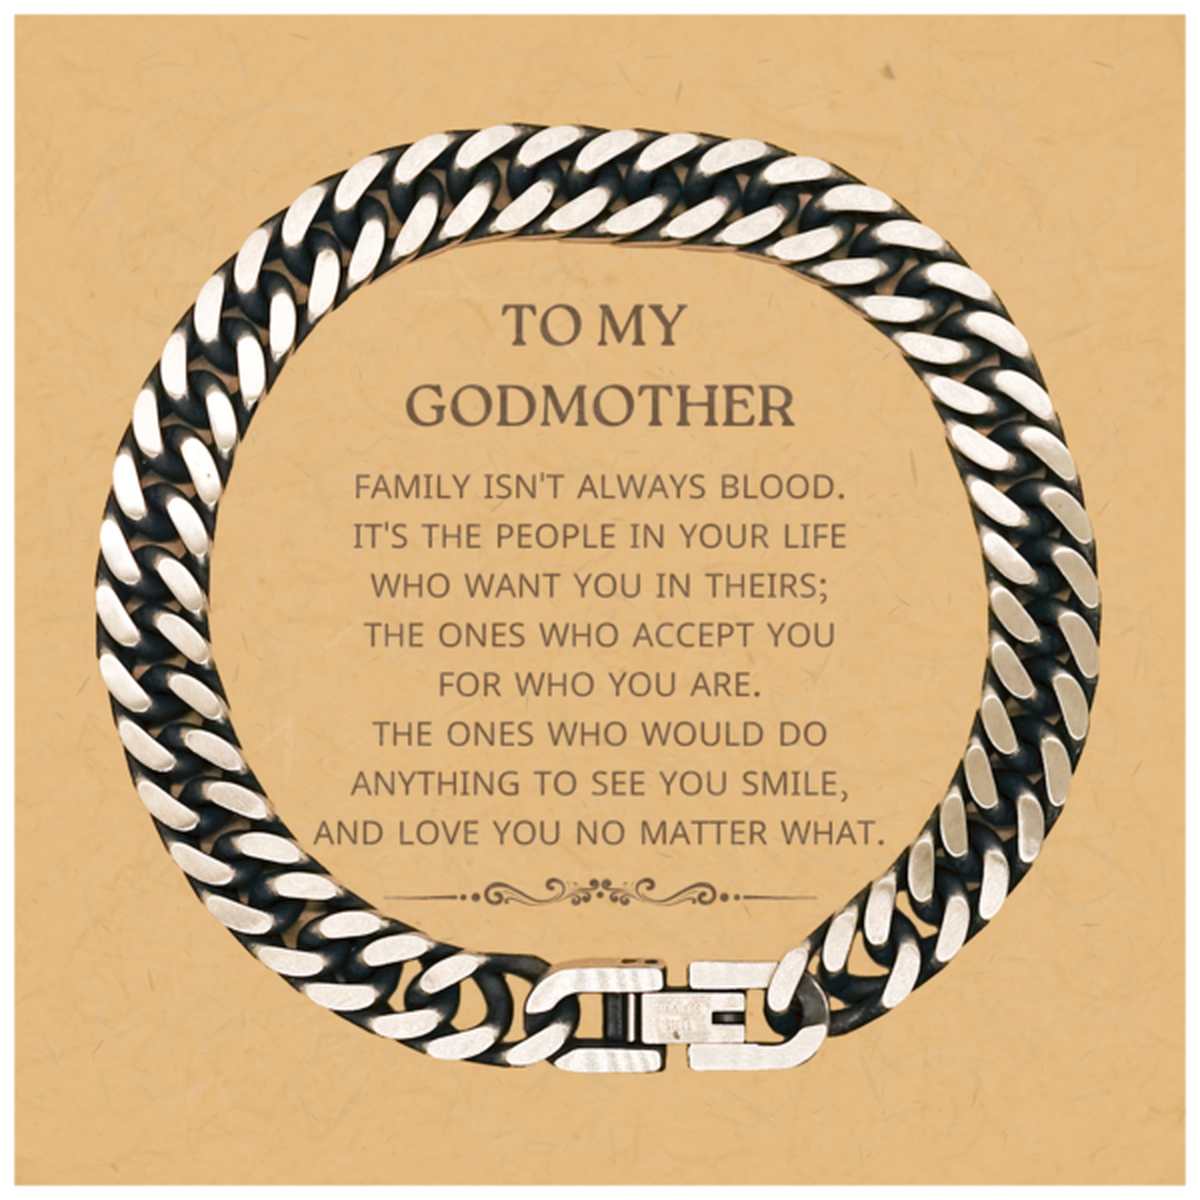 To My Godmother Gifts, Family isn't always blood, Godmother Cuban Link Chain Bracelet, Birthday Christmas Unique Present For Godmother